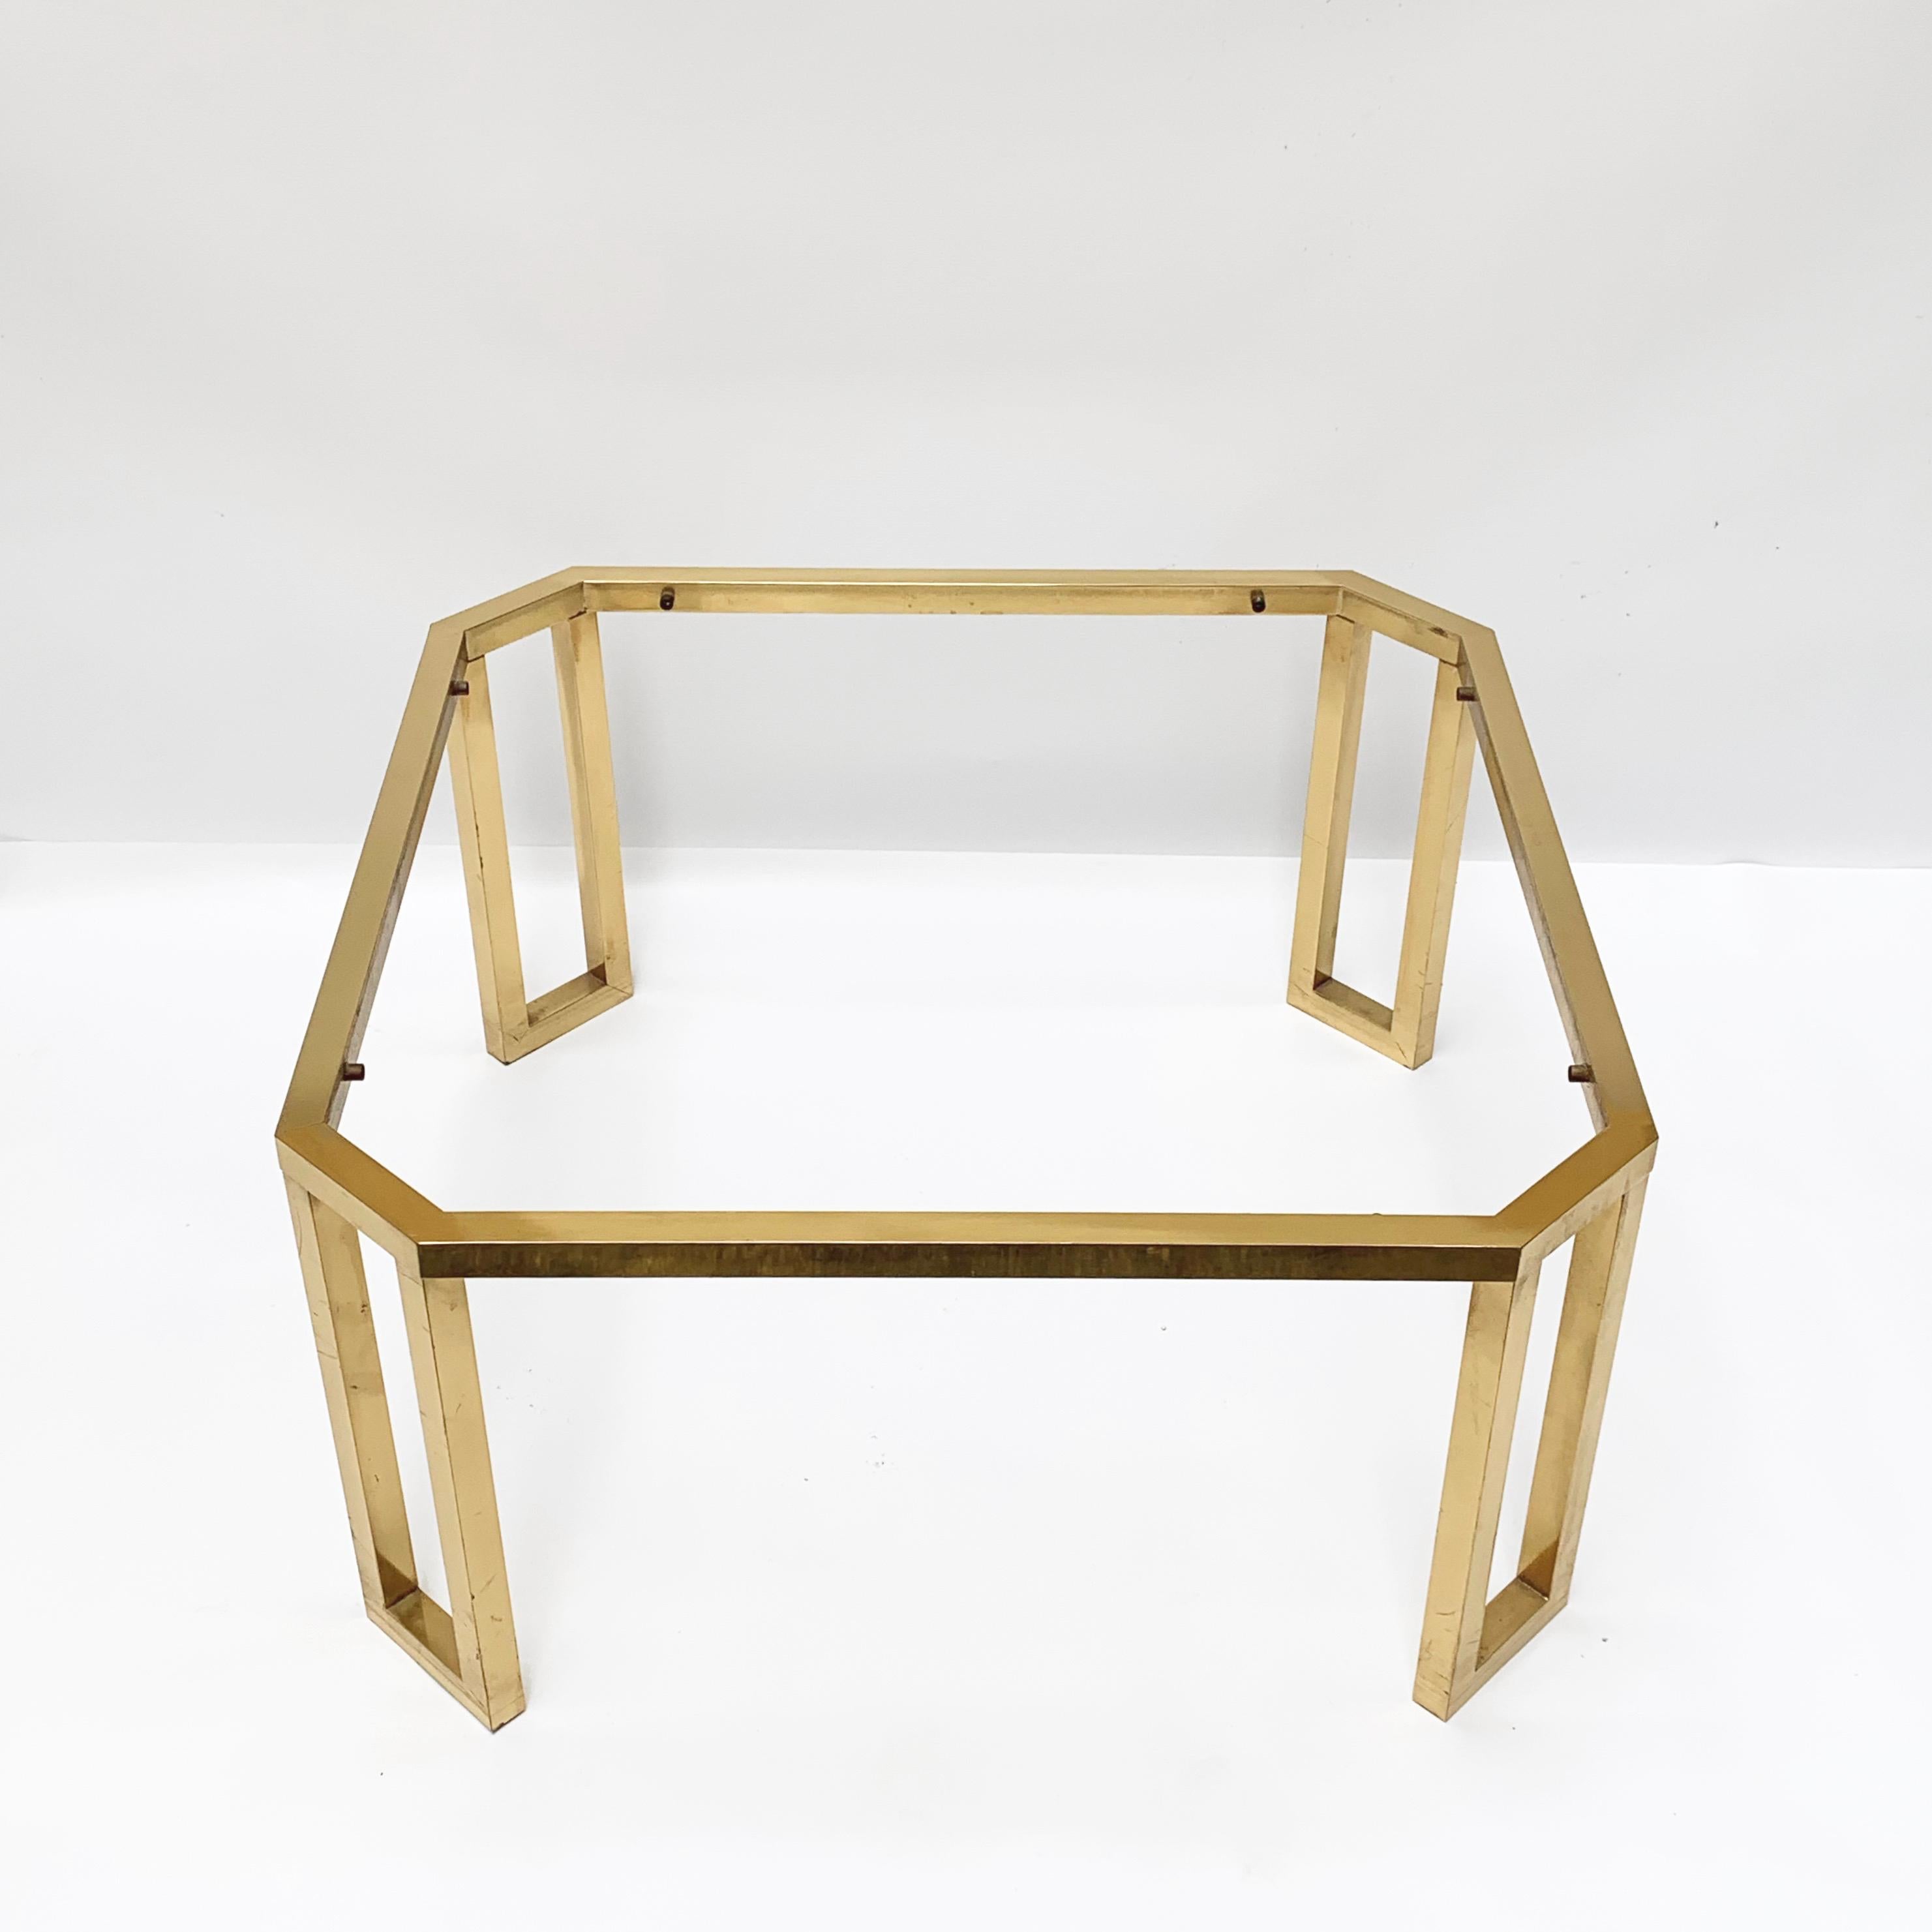 Maison Jansen Octagonal Tables in Brass and Glass, France, 1970s Coffee Tables For Sale 1